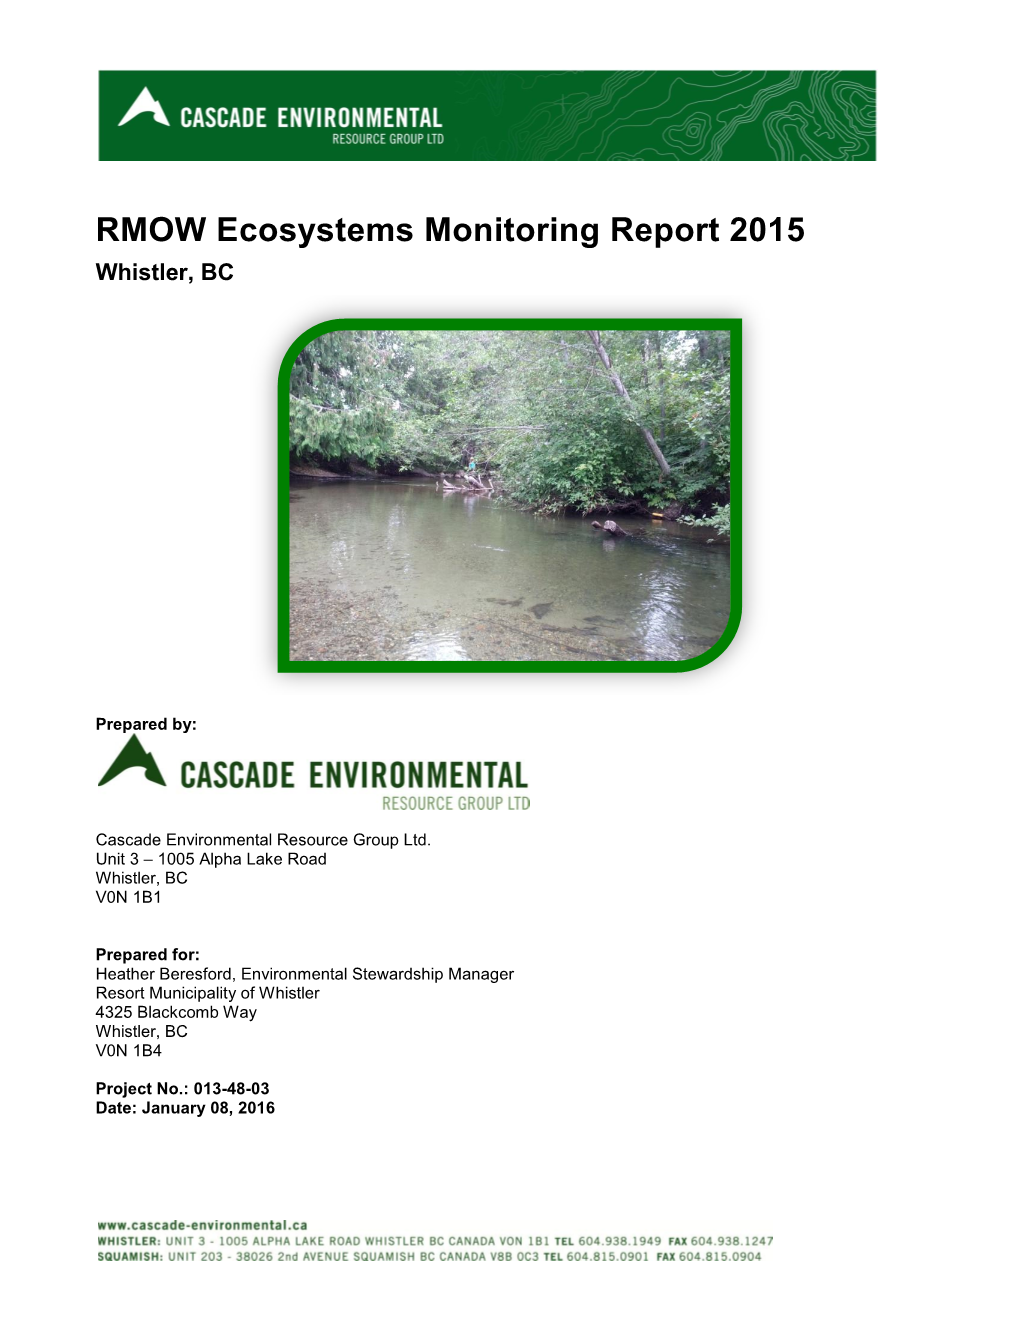 RMOW Ecosystems Monitoring Report 2015 Whistler, BC